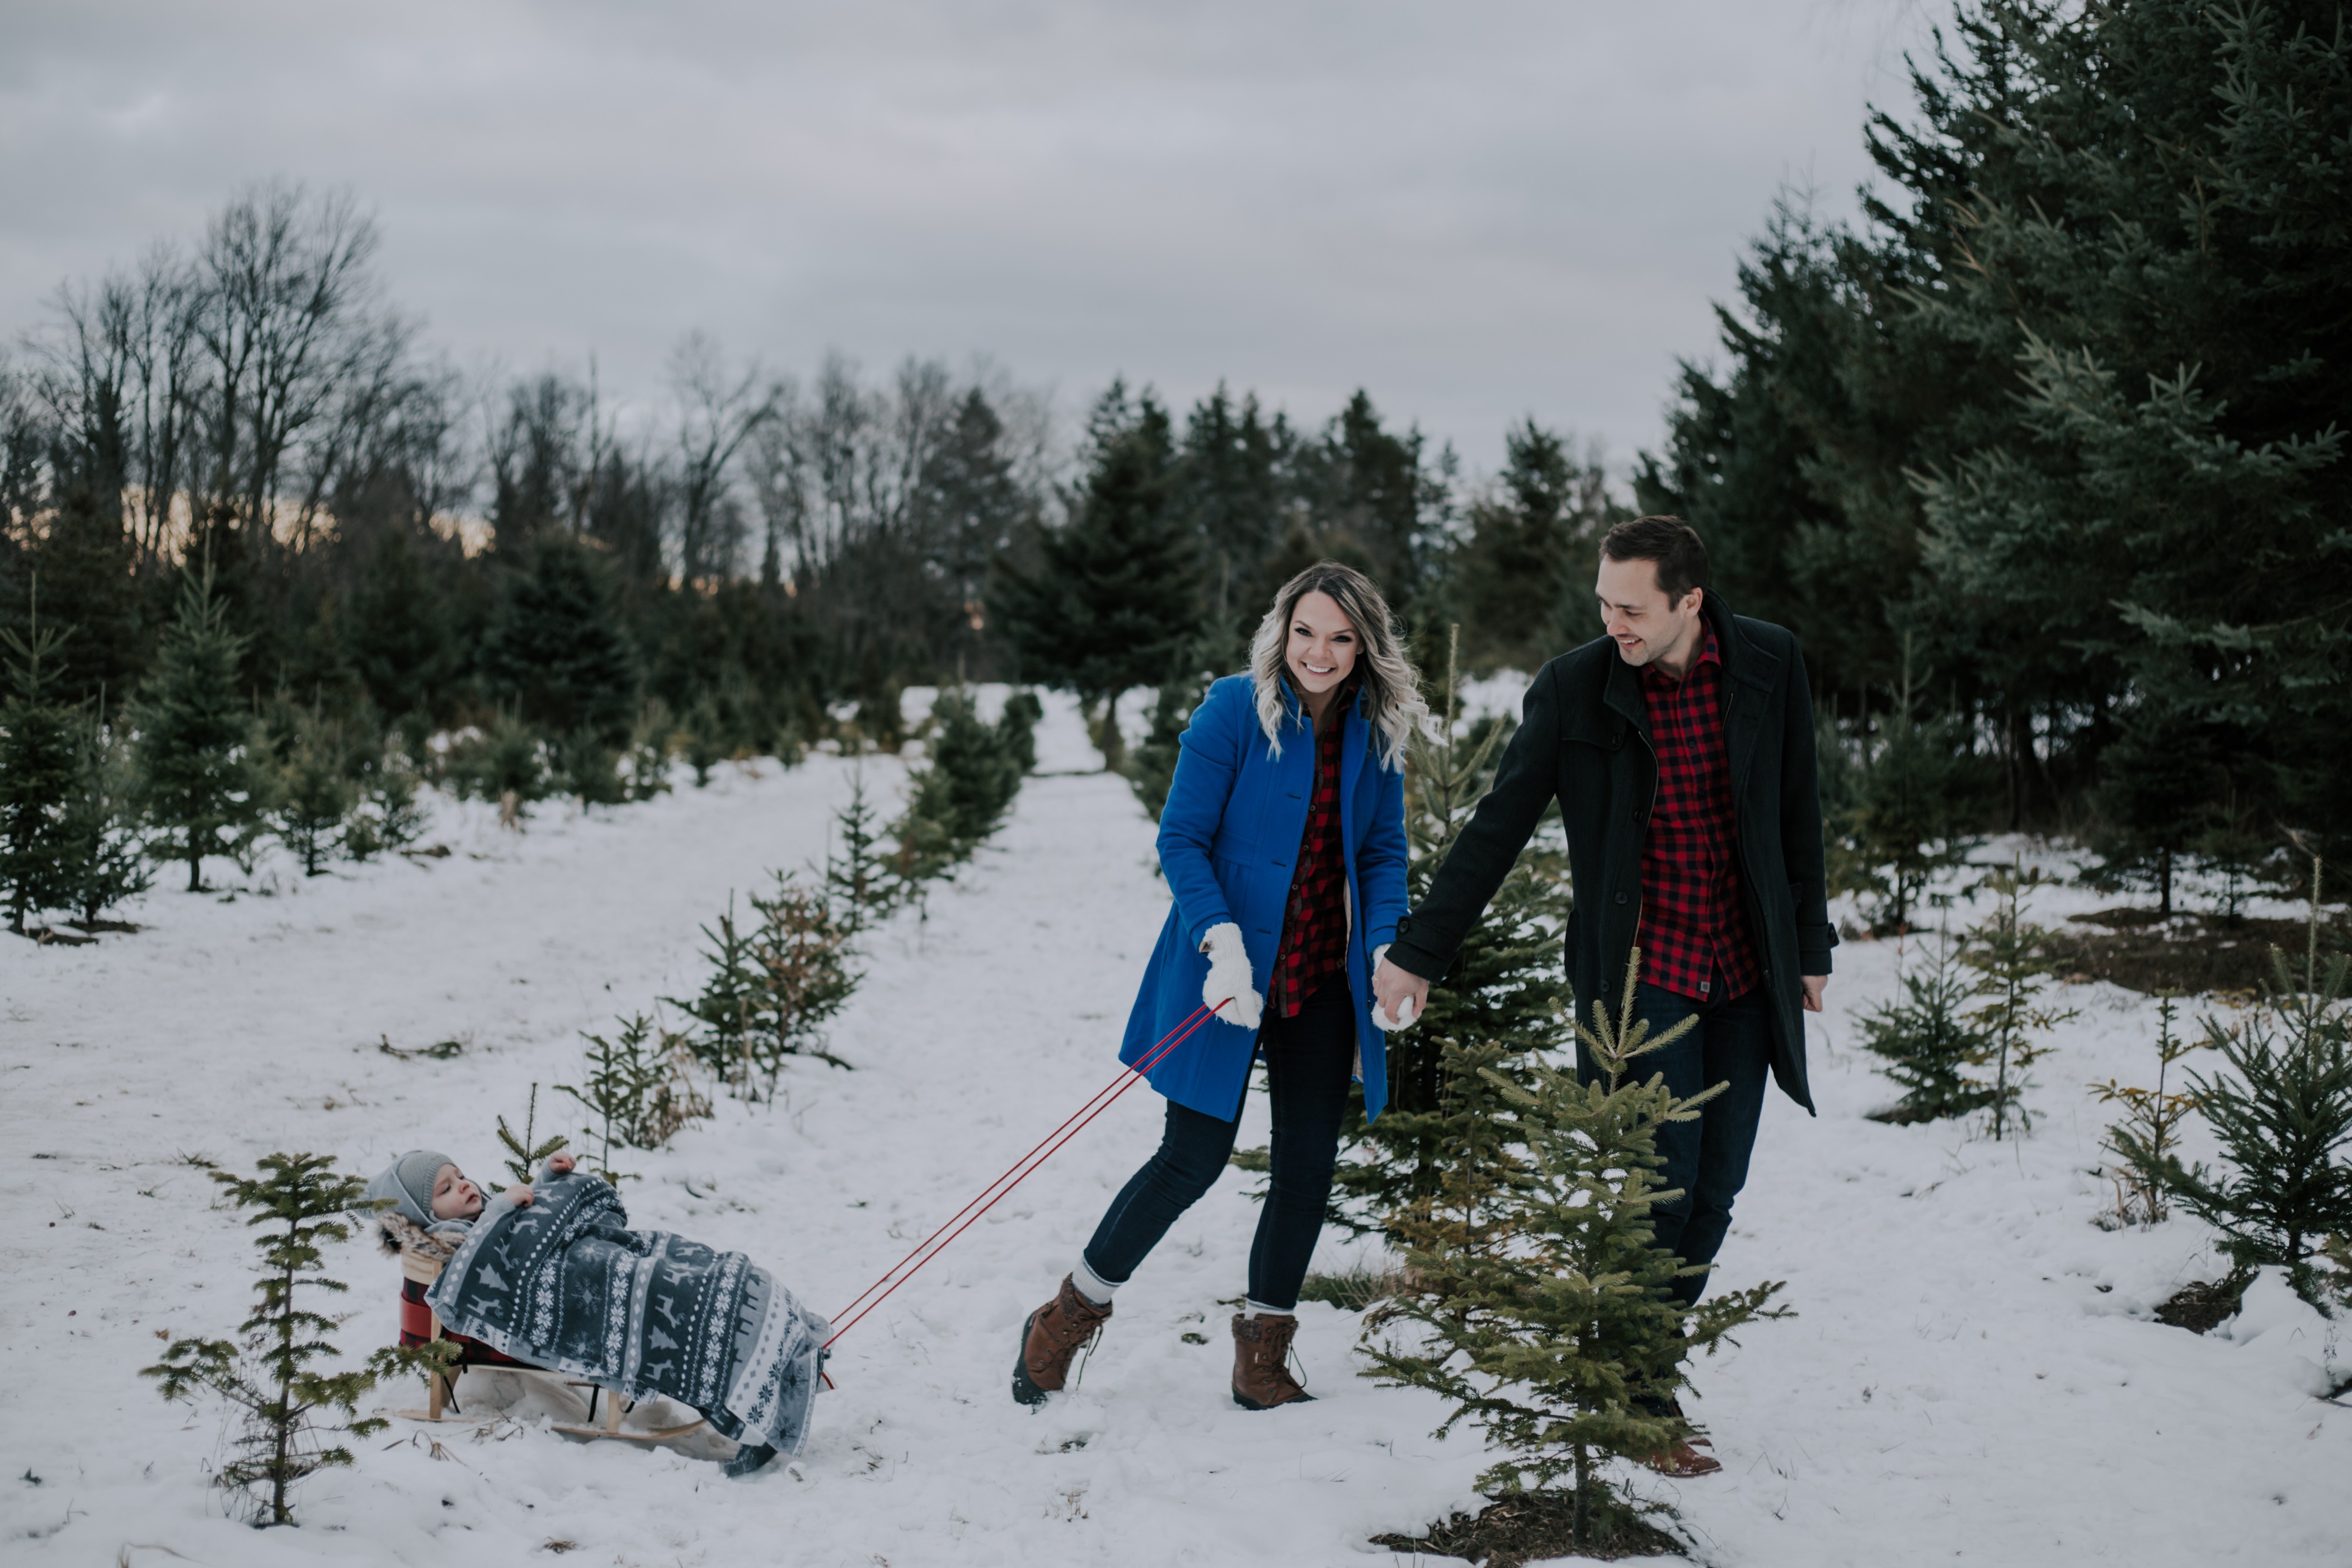 a man leads a woman and the woman pulls a toddler in a wooden sled